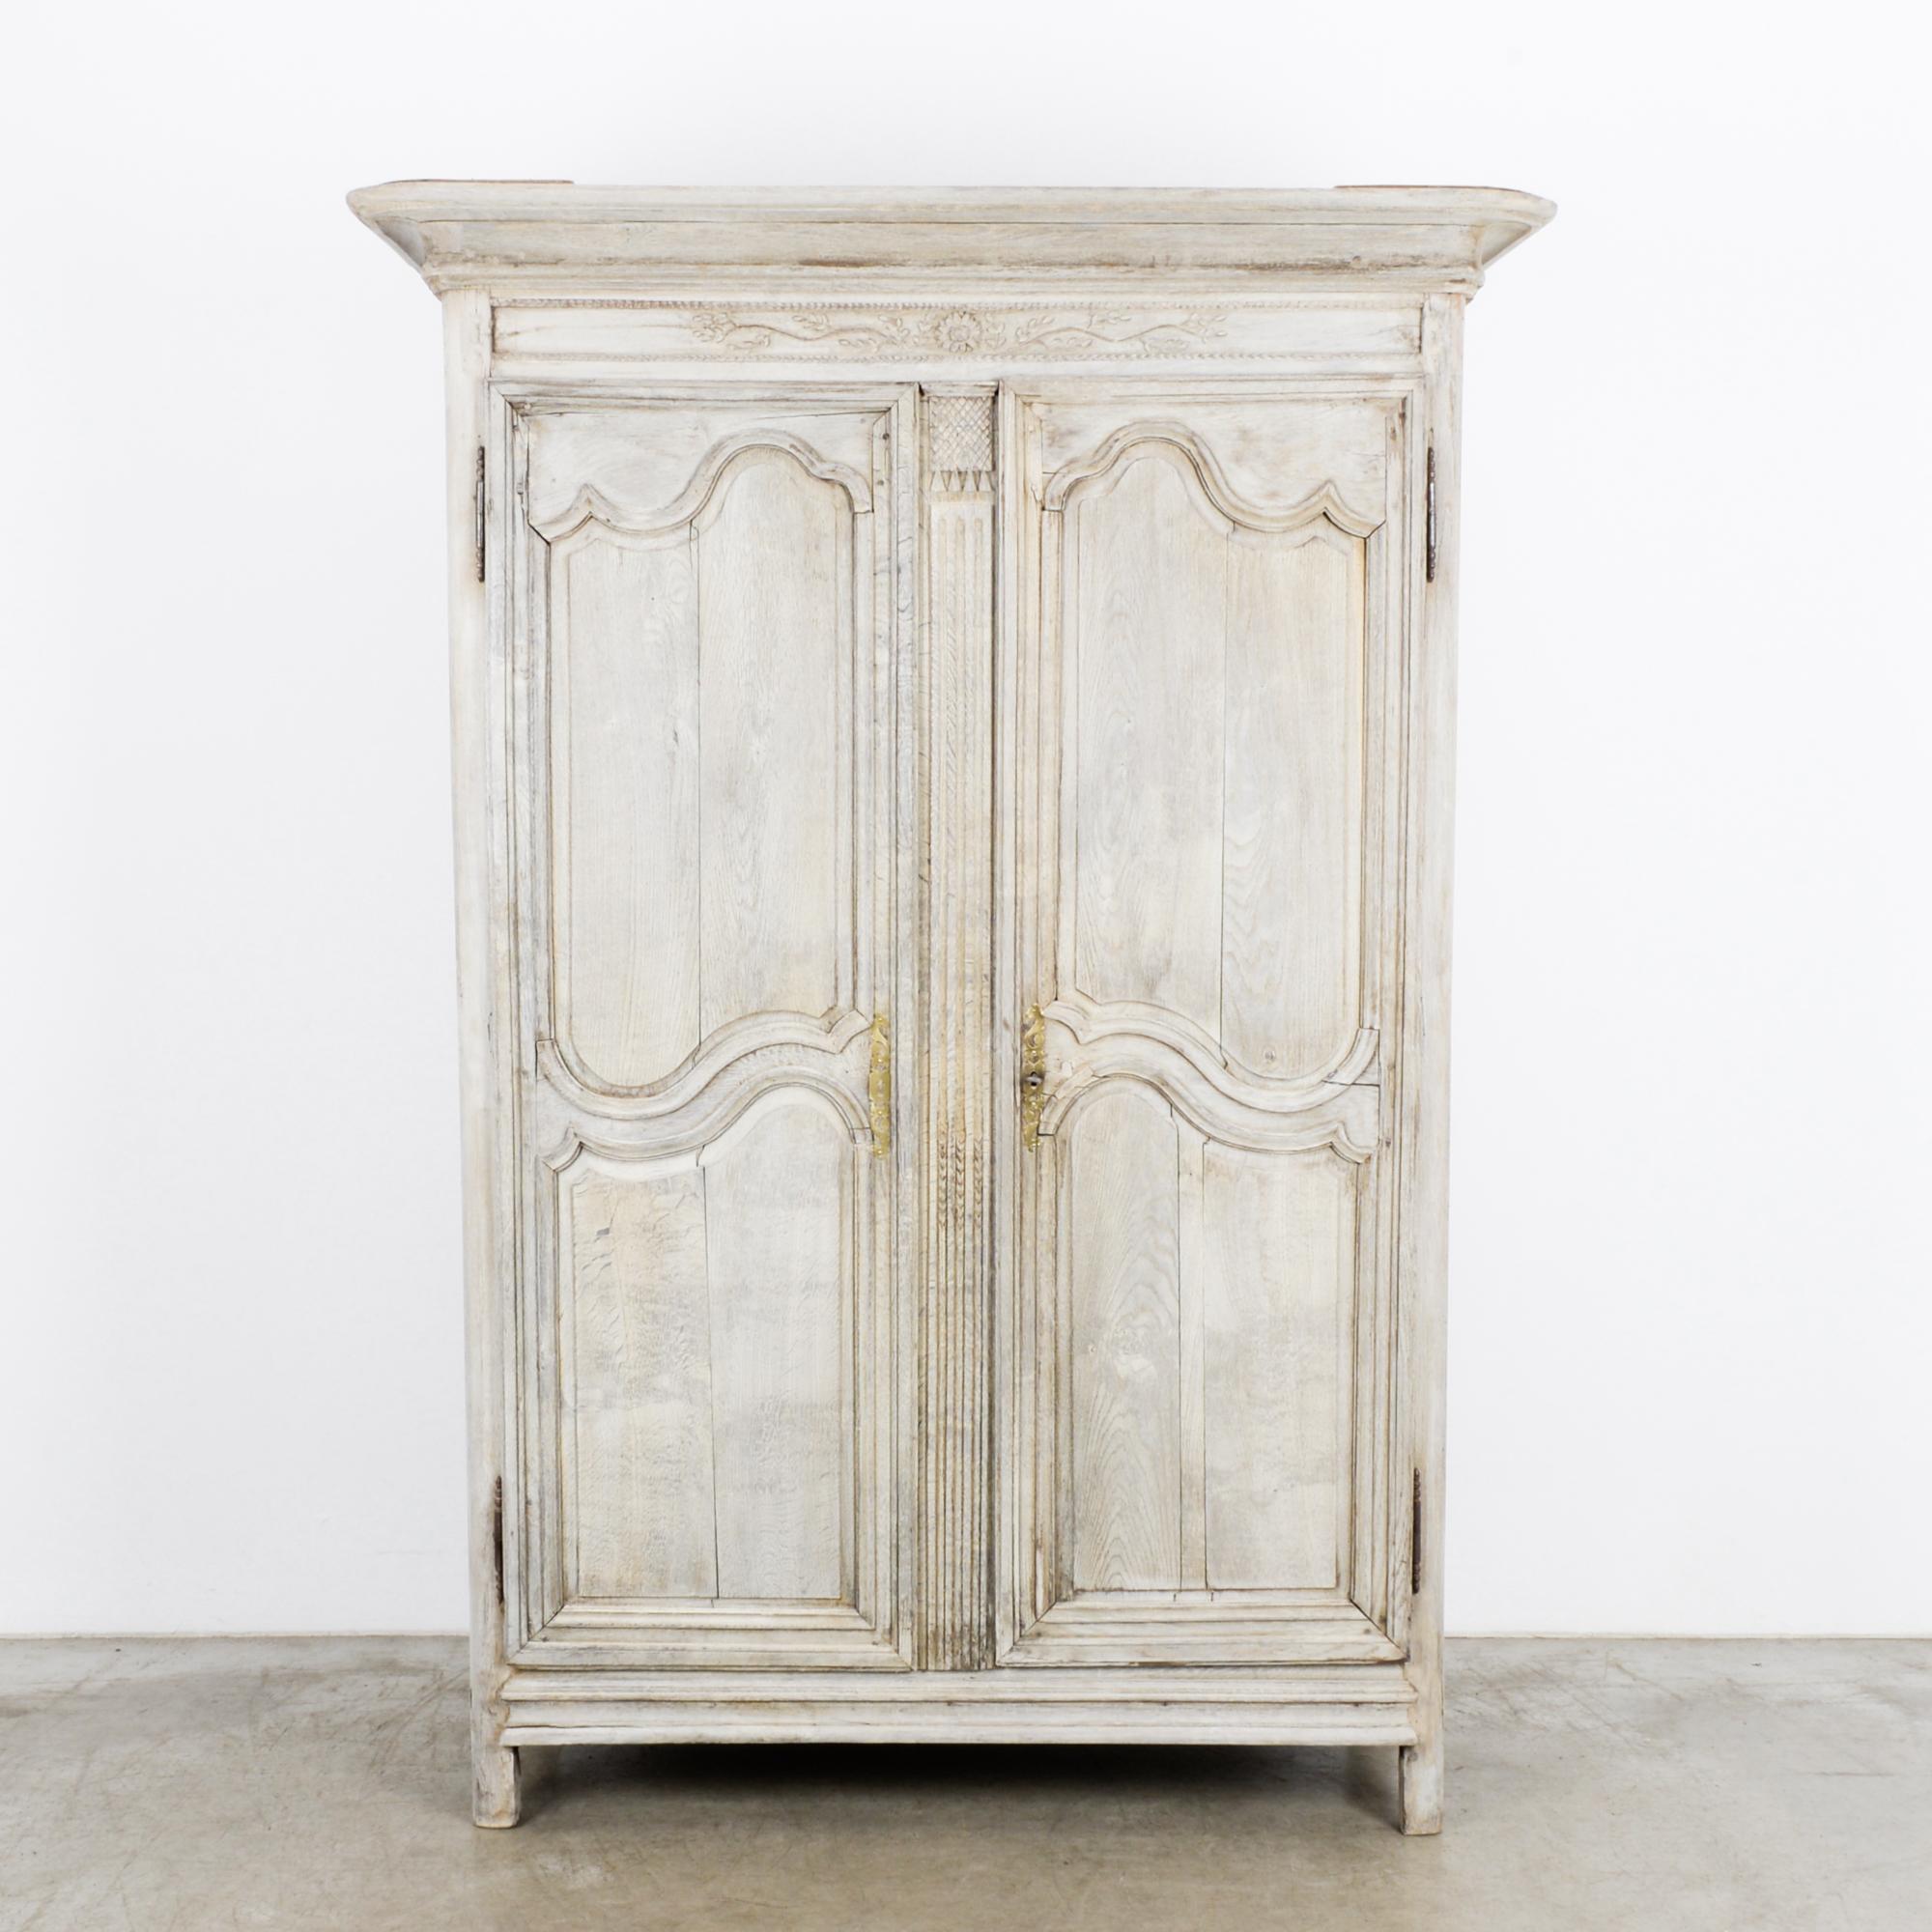 A bleached oak armoire from France, circa 1800. Paneled double doors with sinuous Baroque moldings open onto three shelves. The dark finish of the interior creates a dramatic contrast with the wood of the facade, restored to a clear, pearly white.